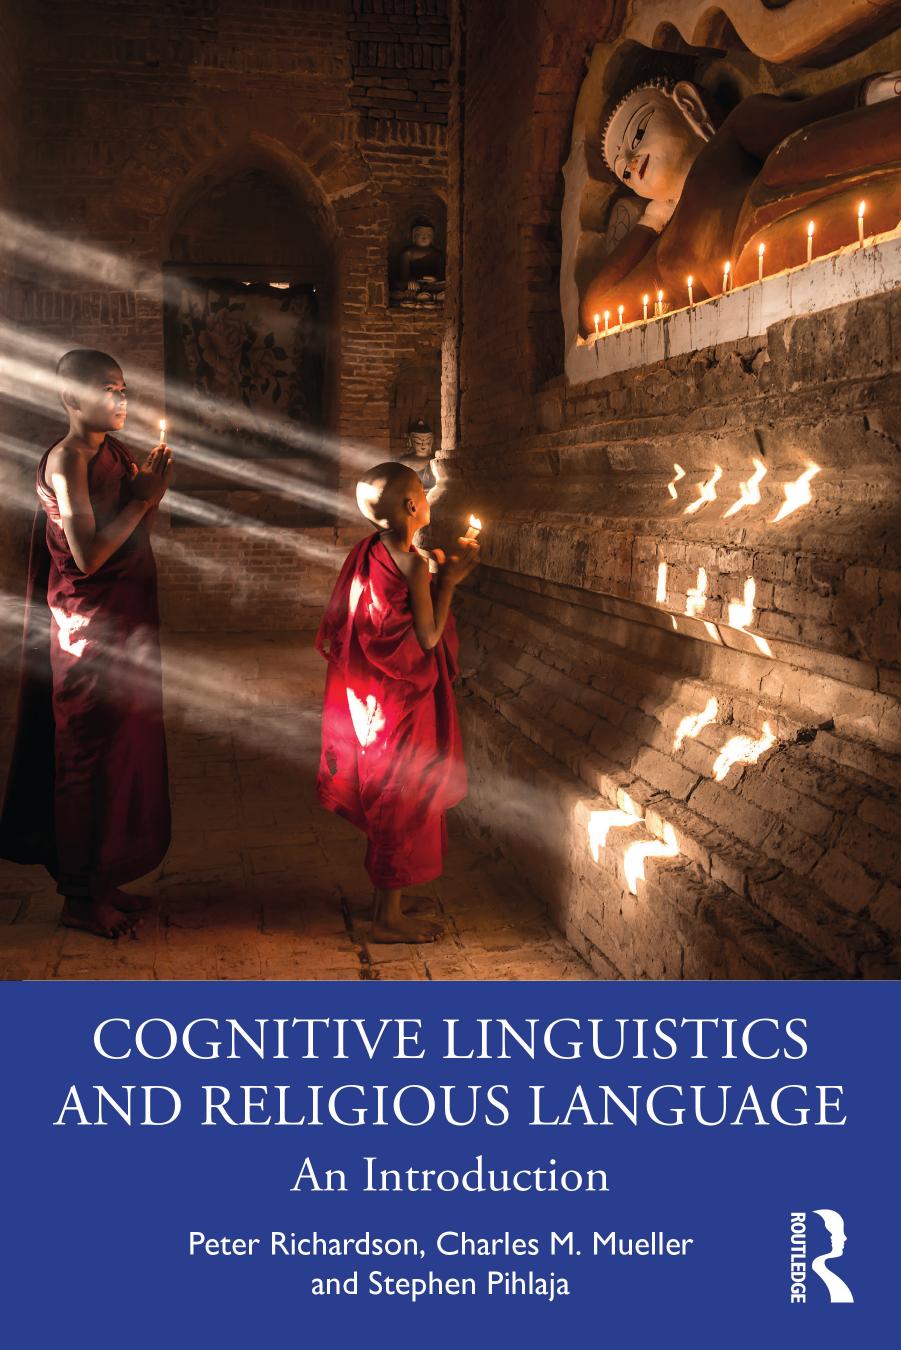 Cognitive Linguistics and Religious Language An Introduction 1st  by Peter Richardson  and  Charles M. Mueller  and  Stephen Pihlaja